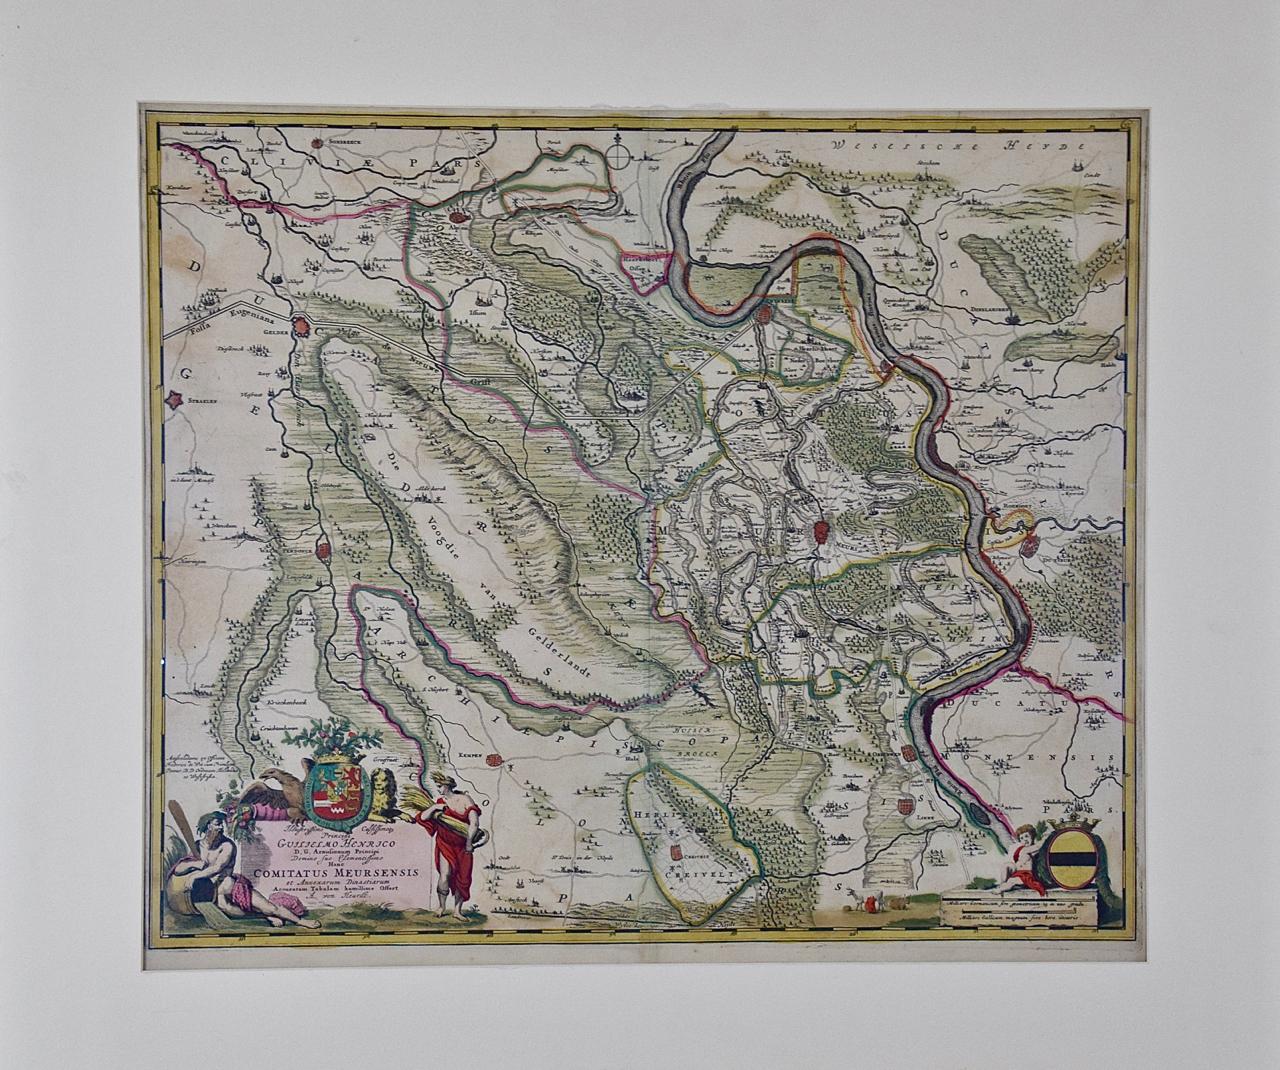 This original 18th century hand-colored map of the county of Moers, Germany entitled 